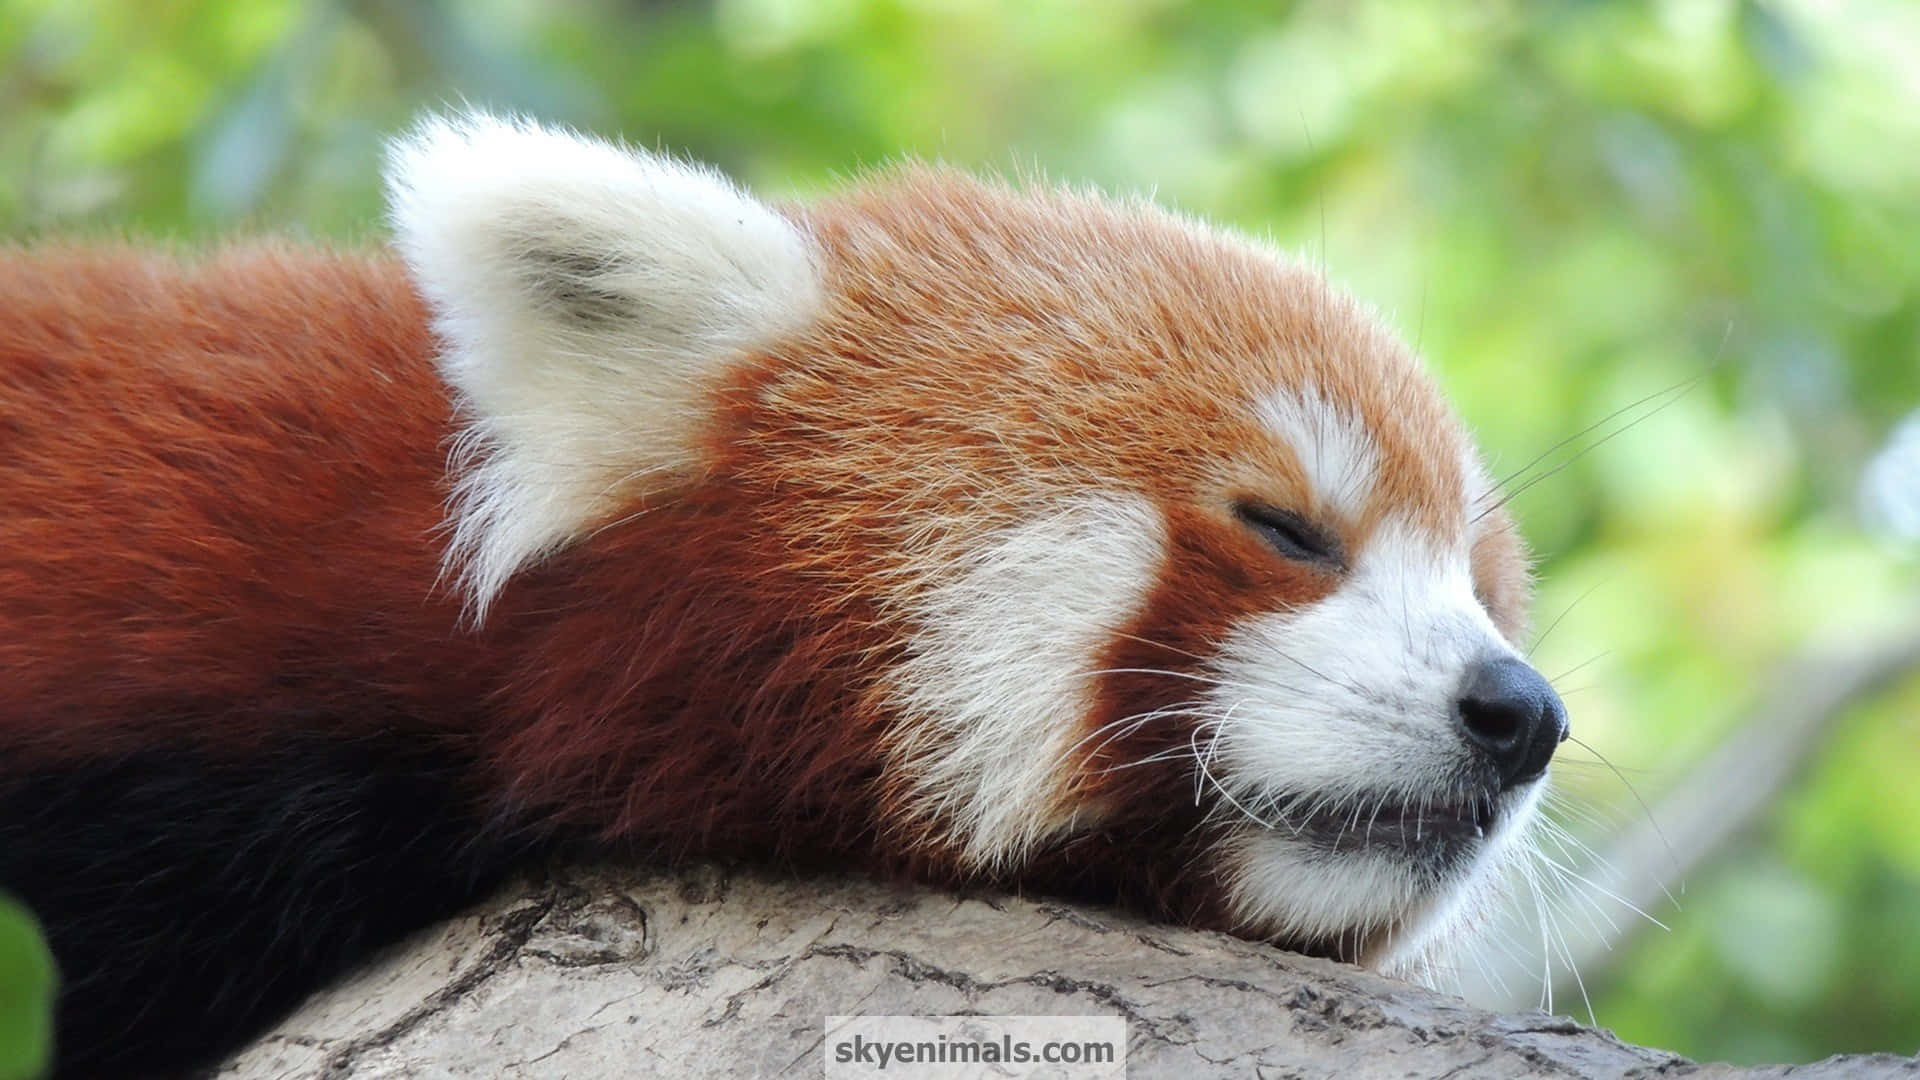 Meet our new friend - a sweet and cuddly Red Panda! Wallpaper